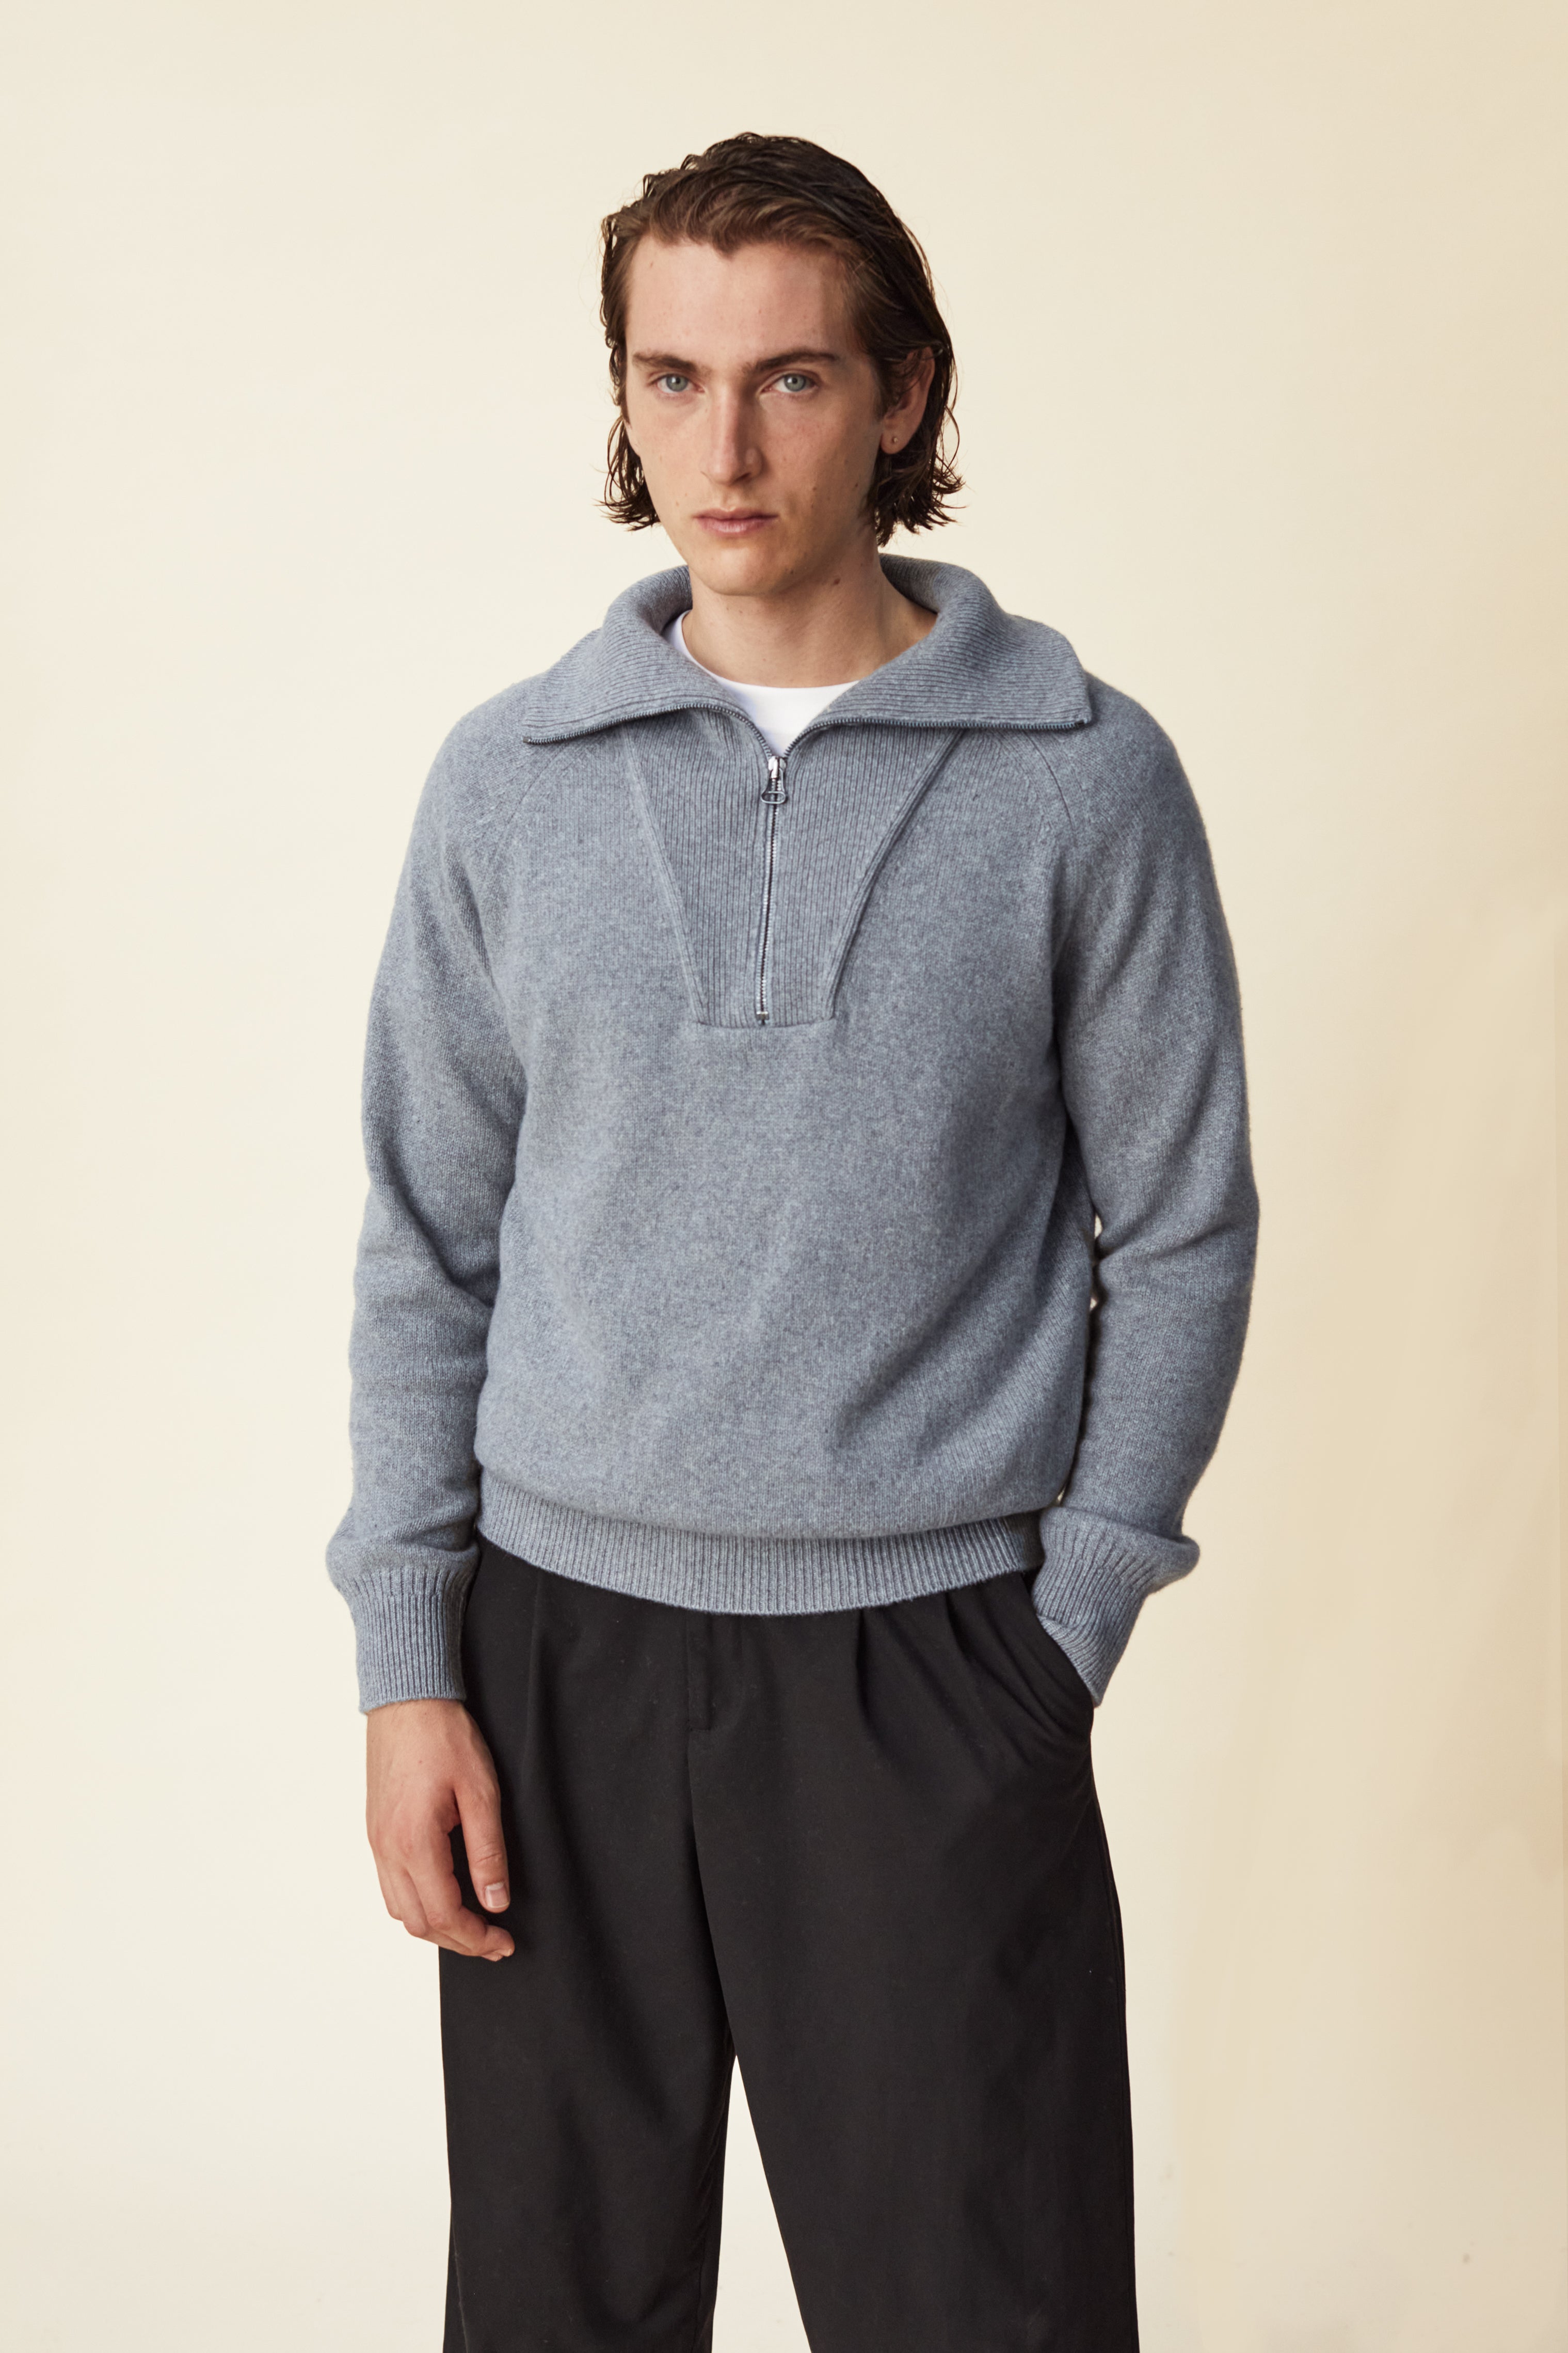 Men's zipped neck sweater in Cashmere Grey